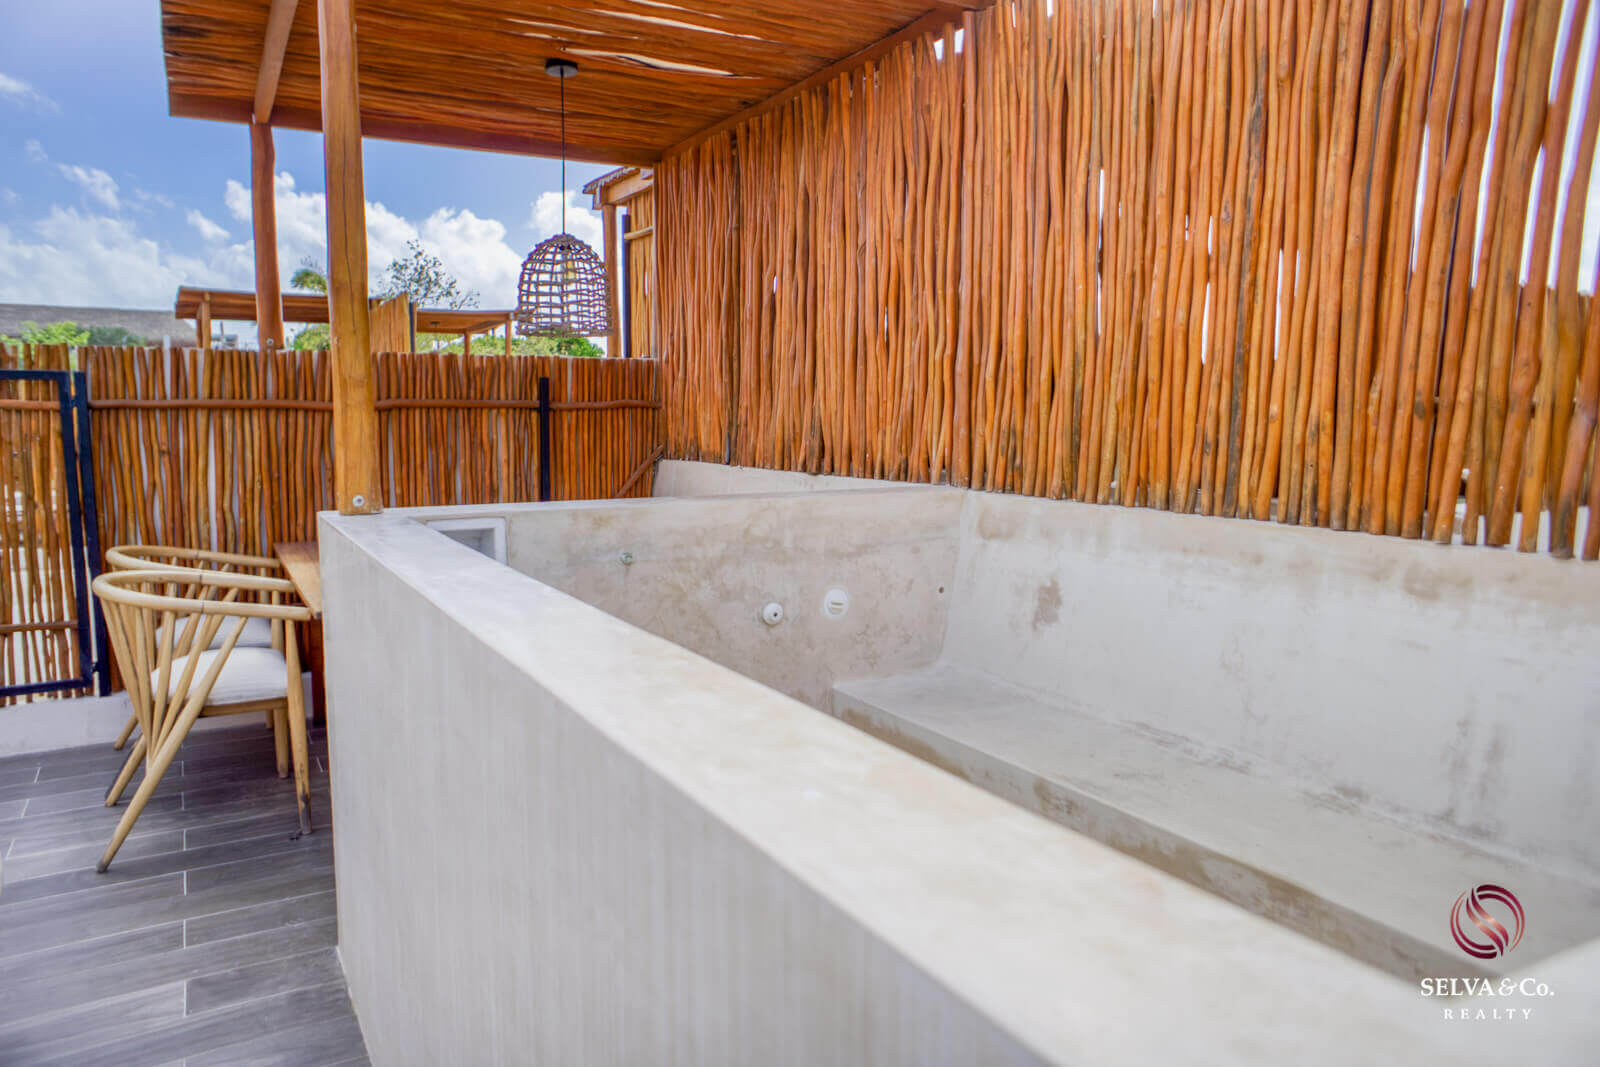 2 bedroom house with private pool for sale in Tulum.